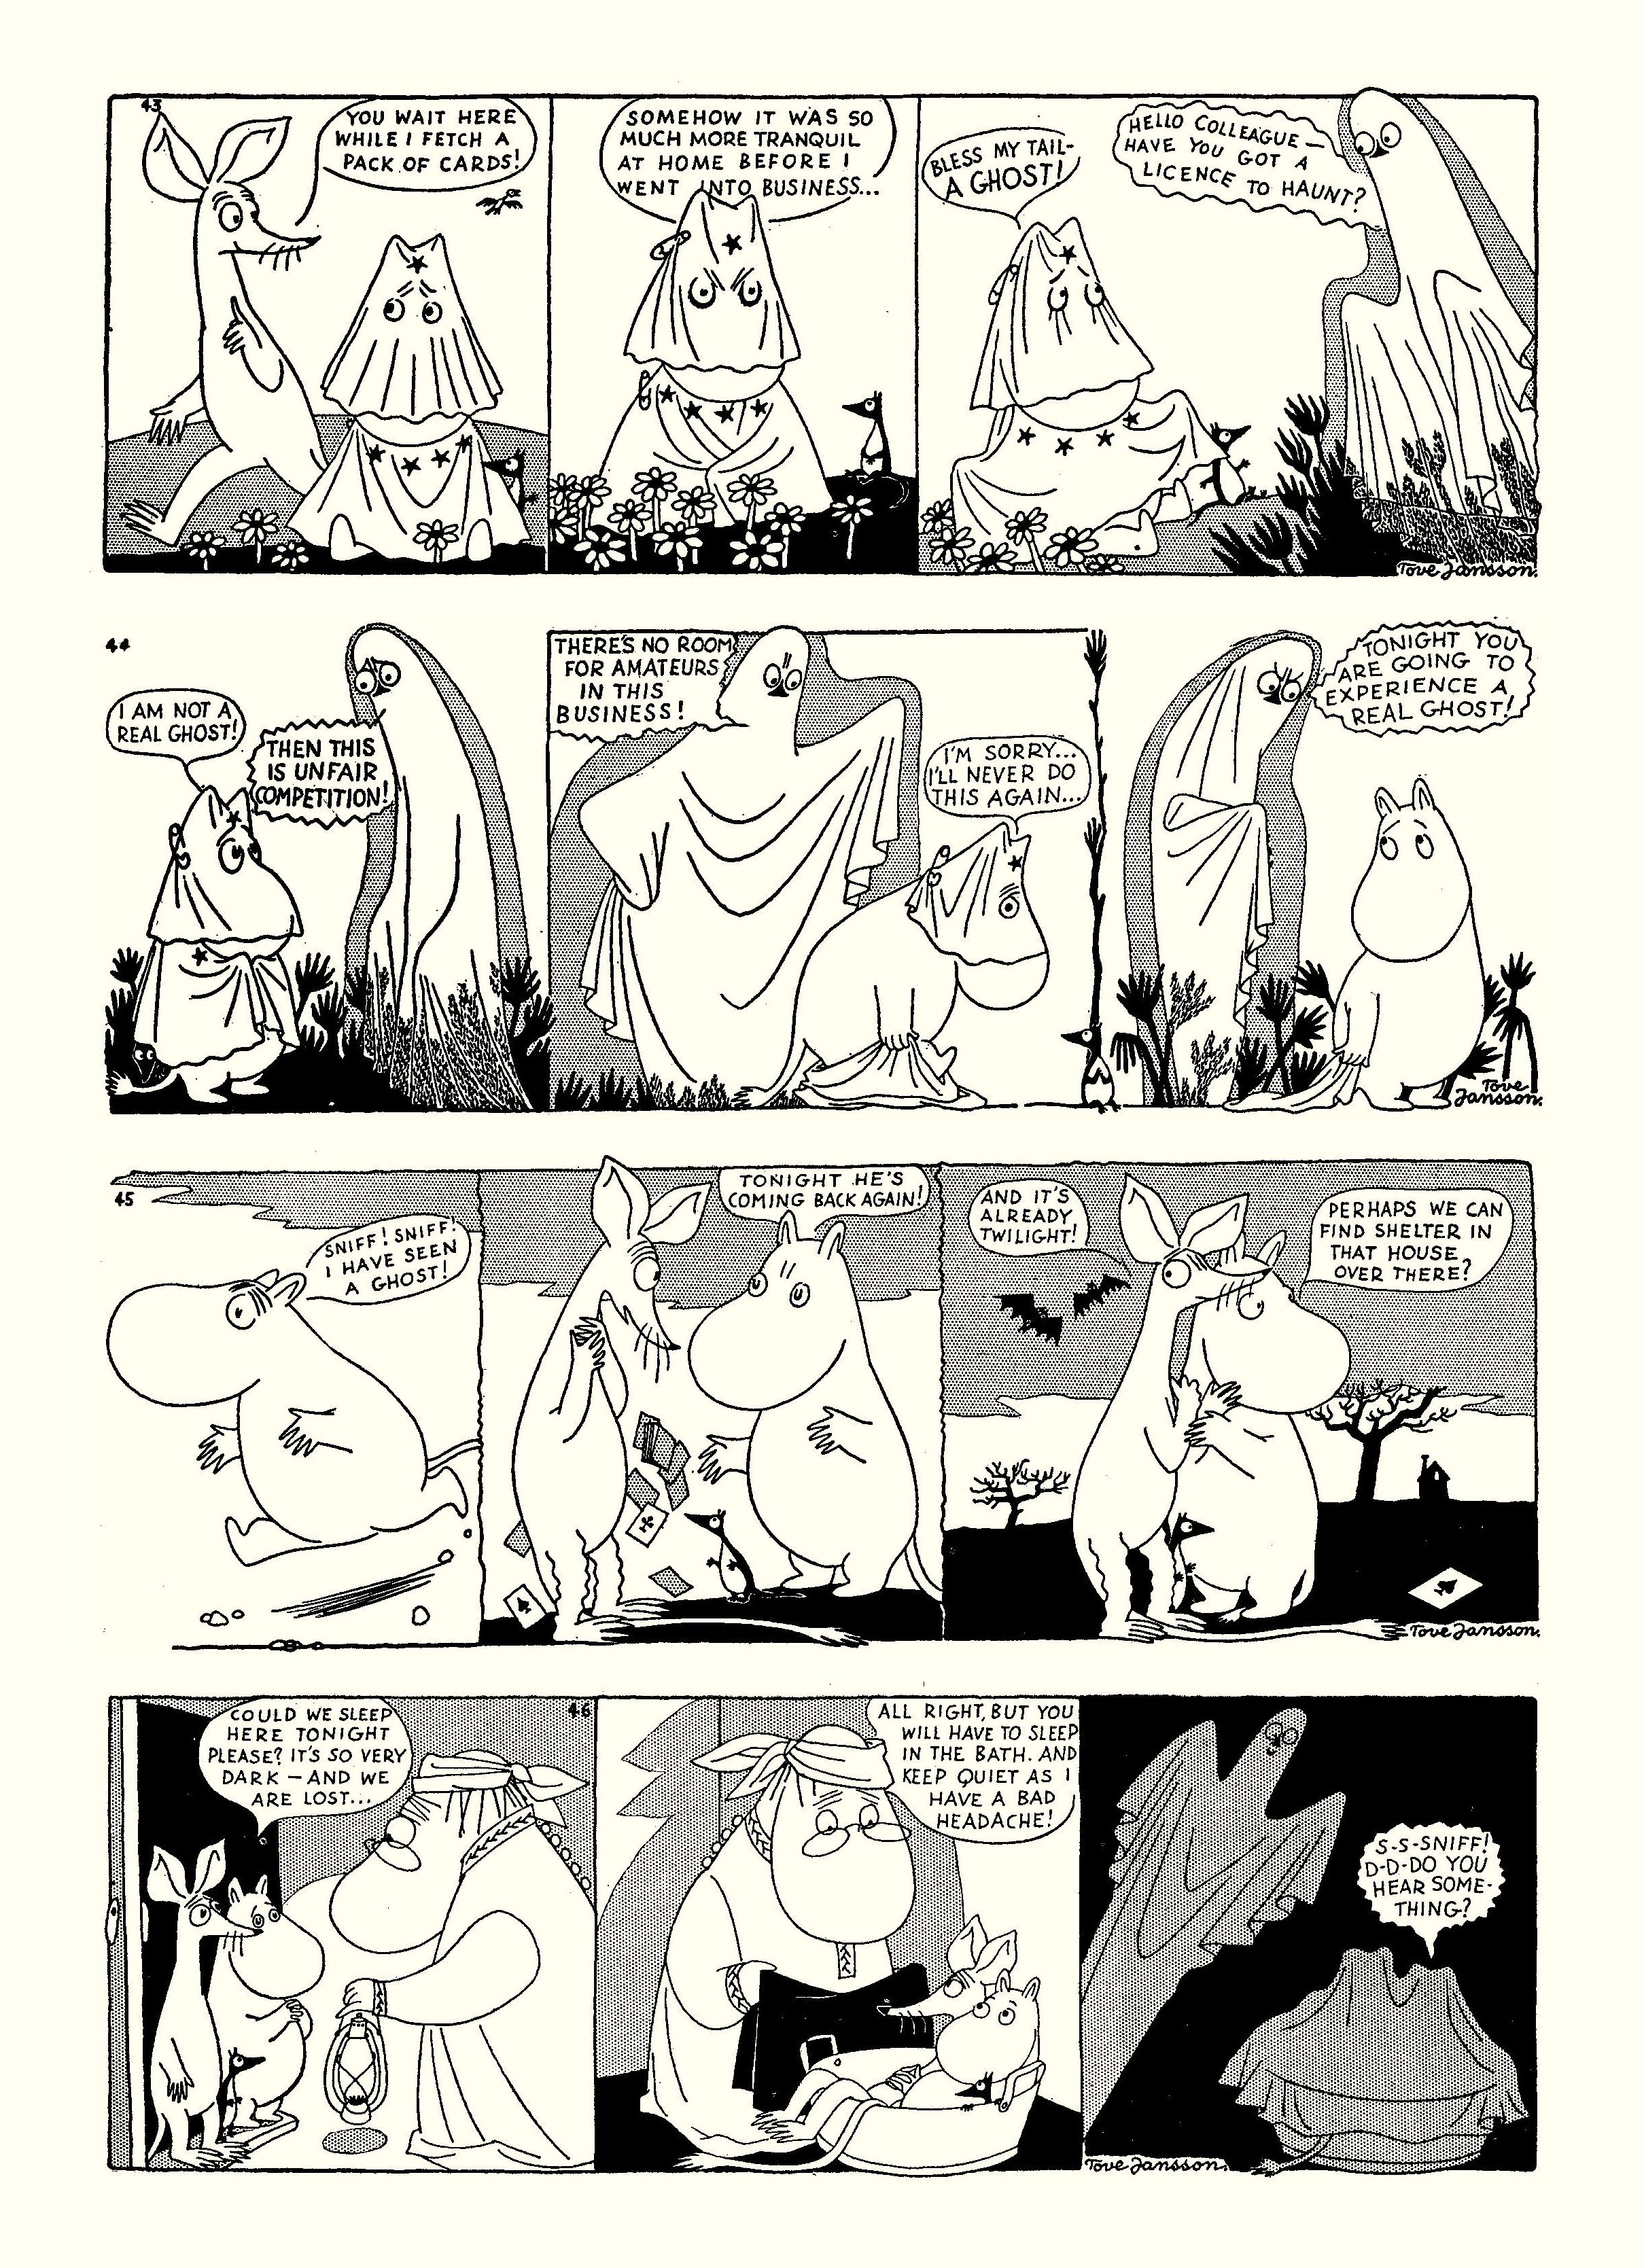 Read online Moomin: The Complete Tove Jansson Comic Strip comic -  Issue # TPB 1 - 17